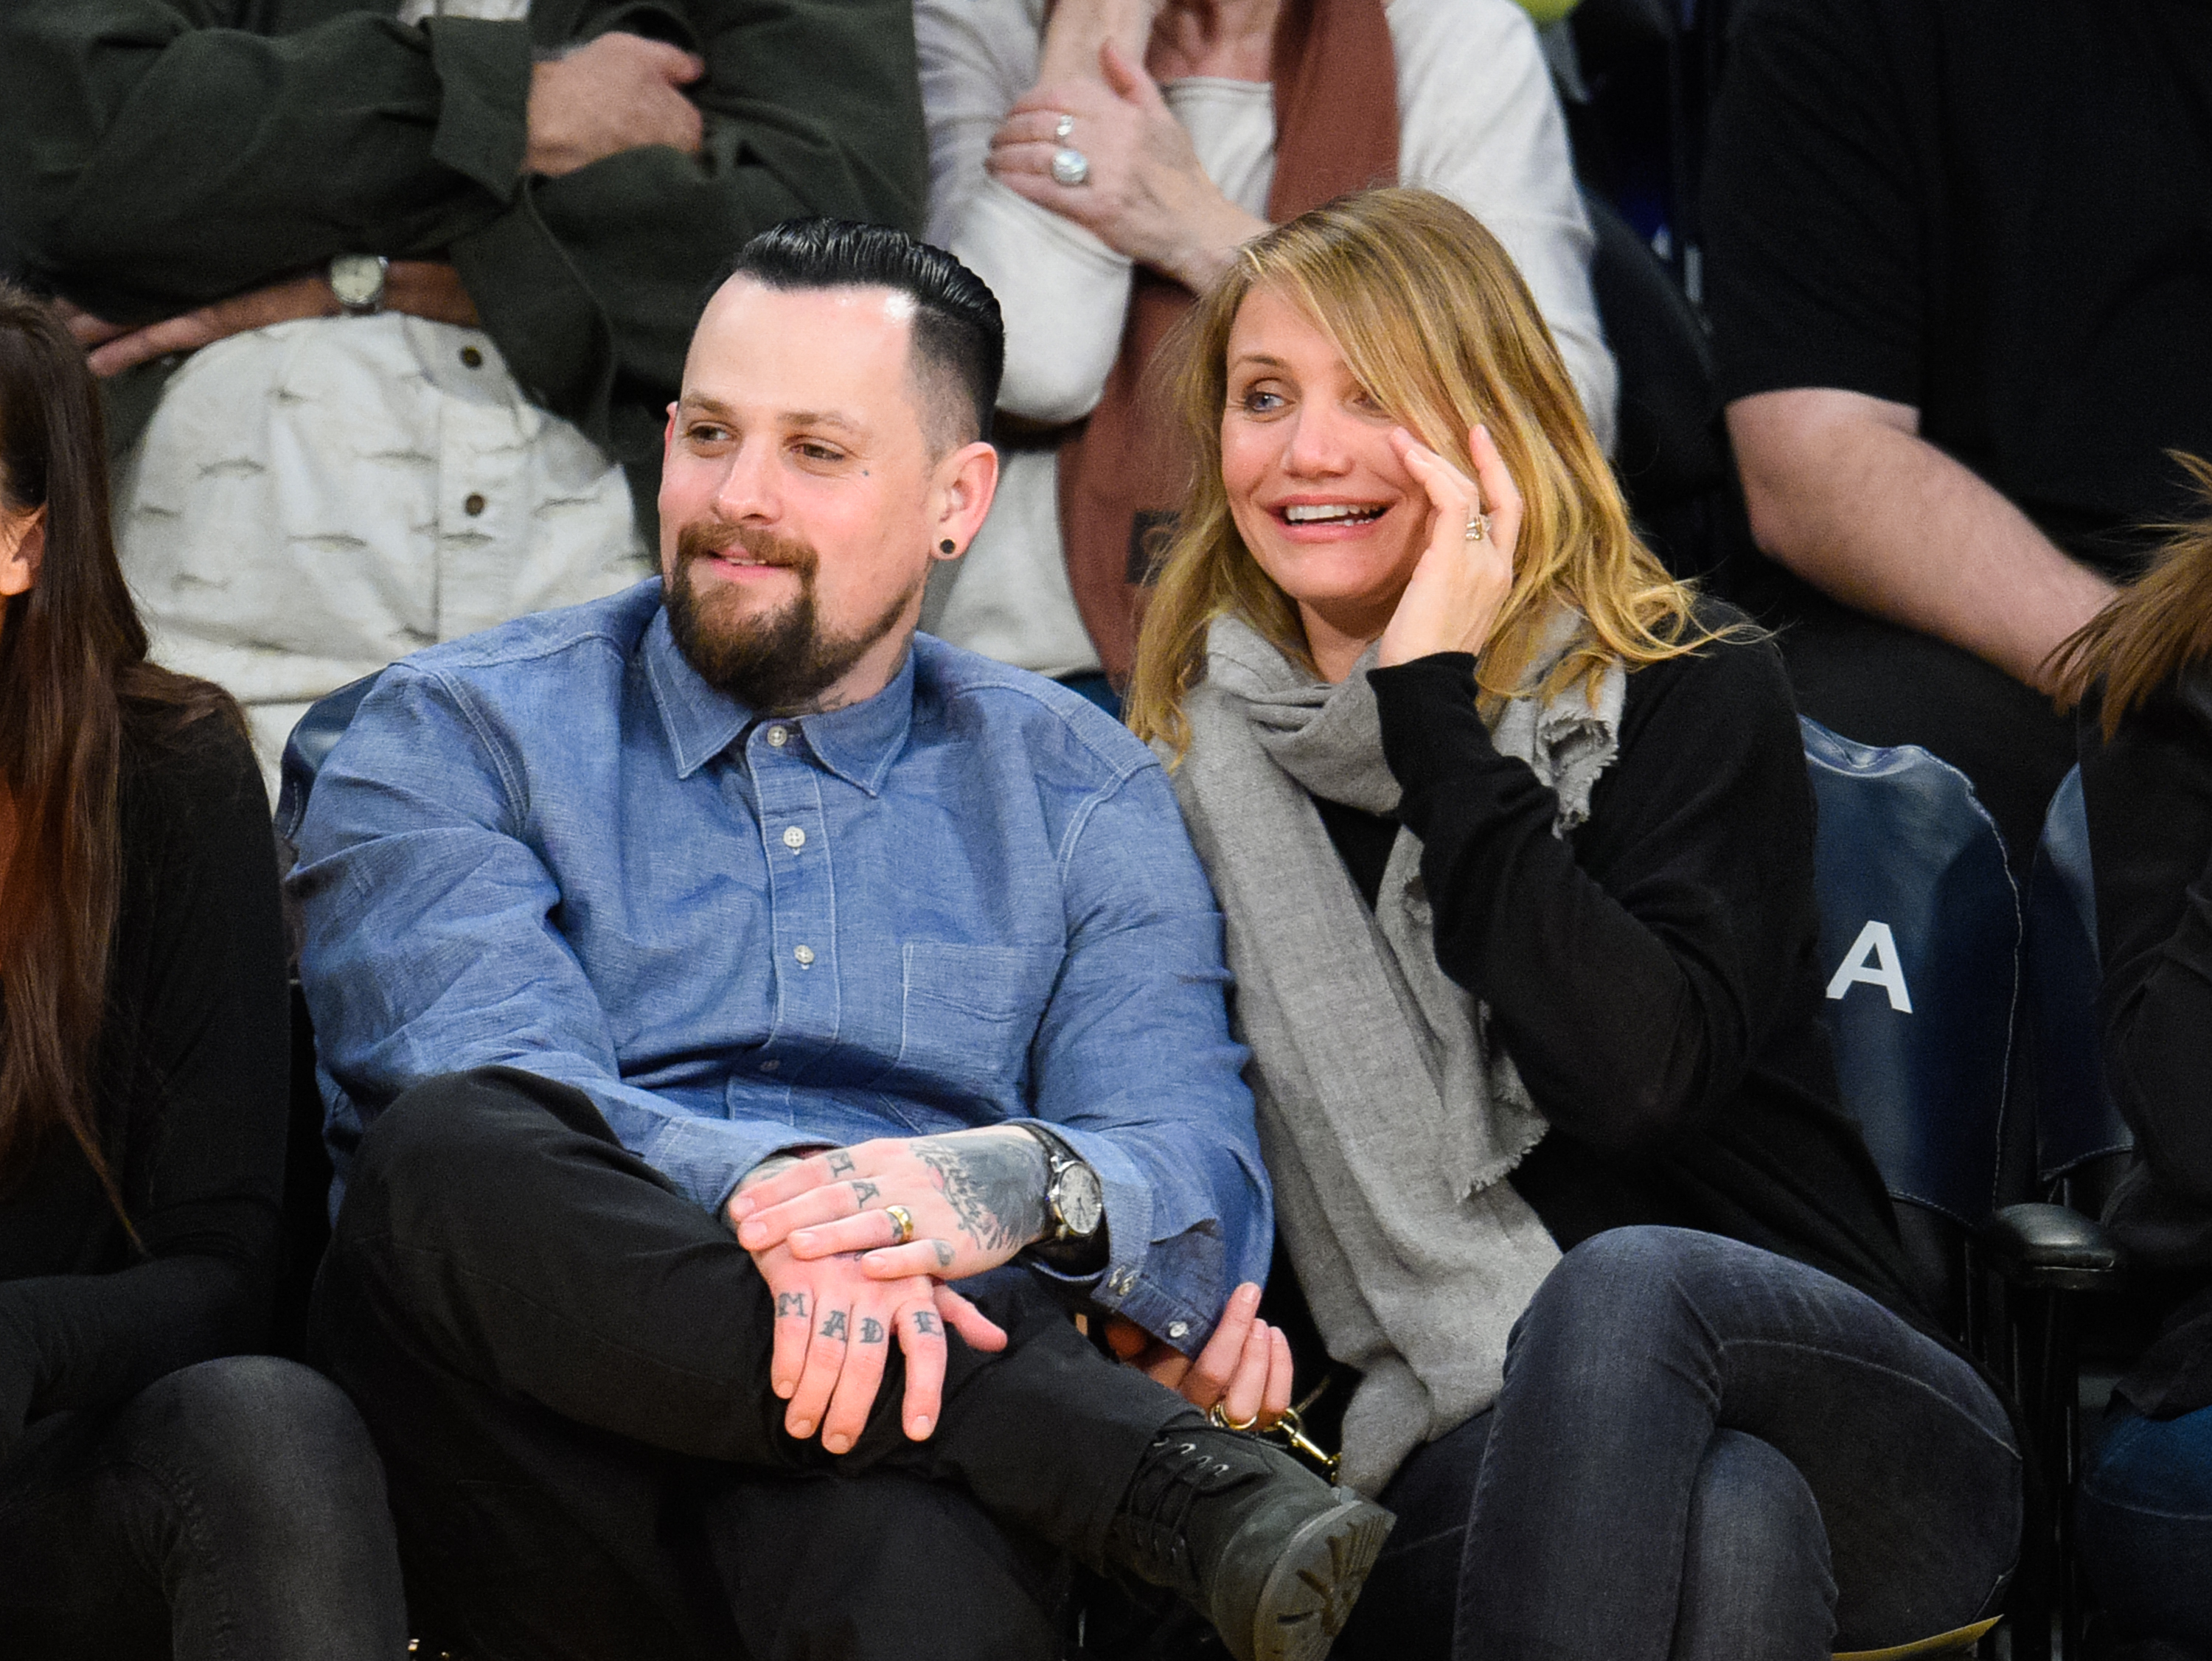 Benji Madden (L) and Cameron Diaz in Los Angeles, California on January 27, 2015 | Source: Getty images